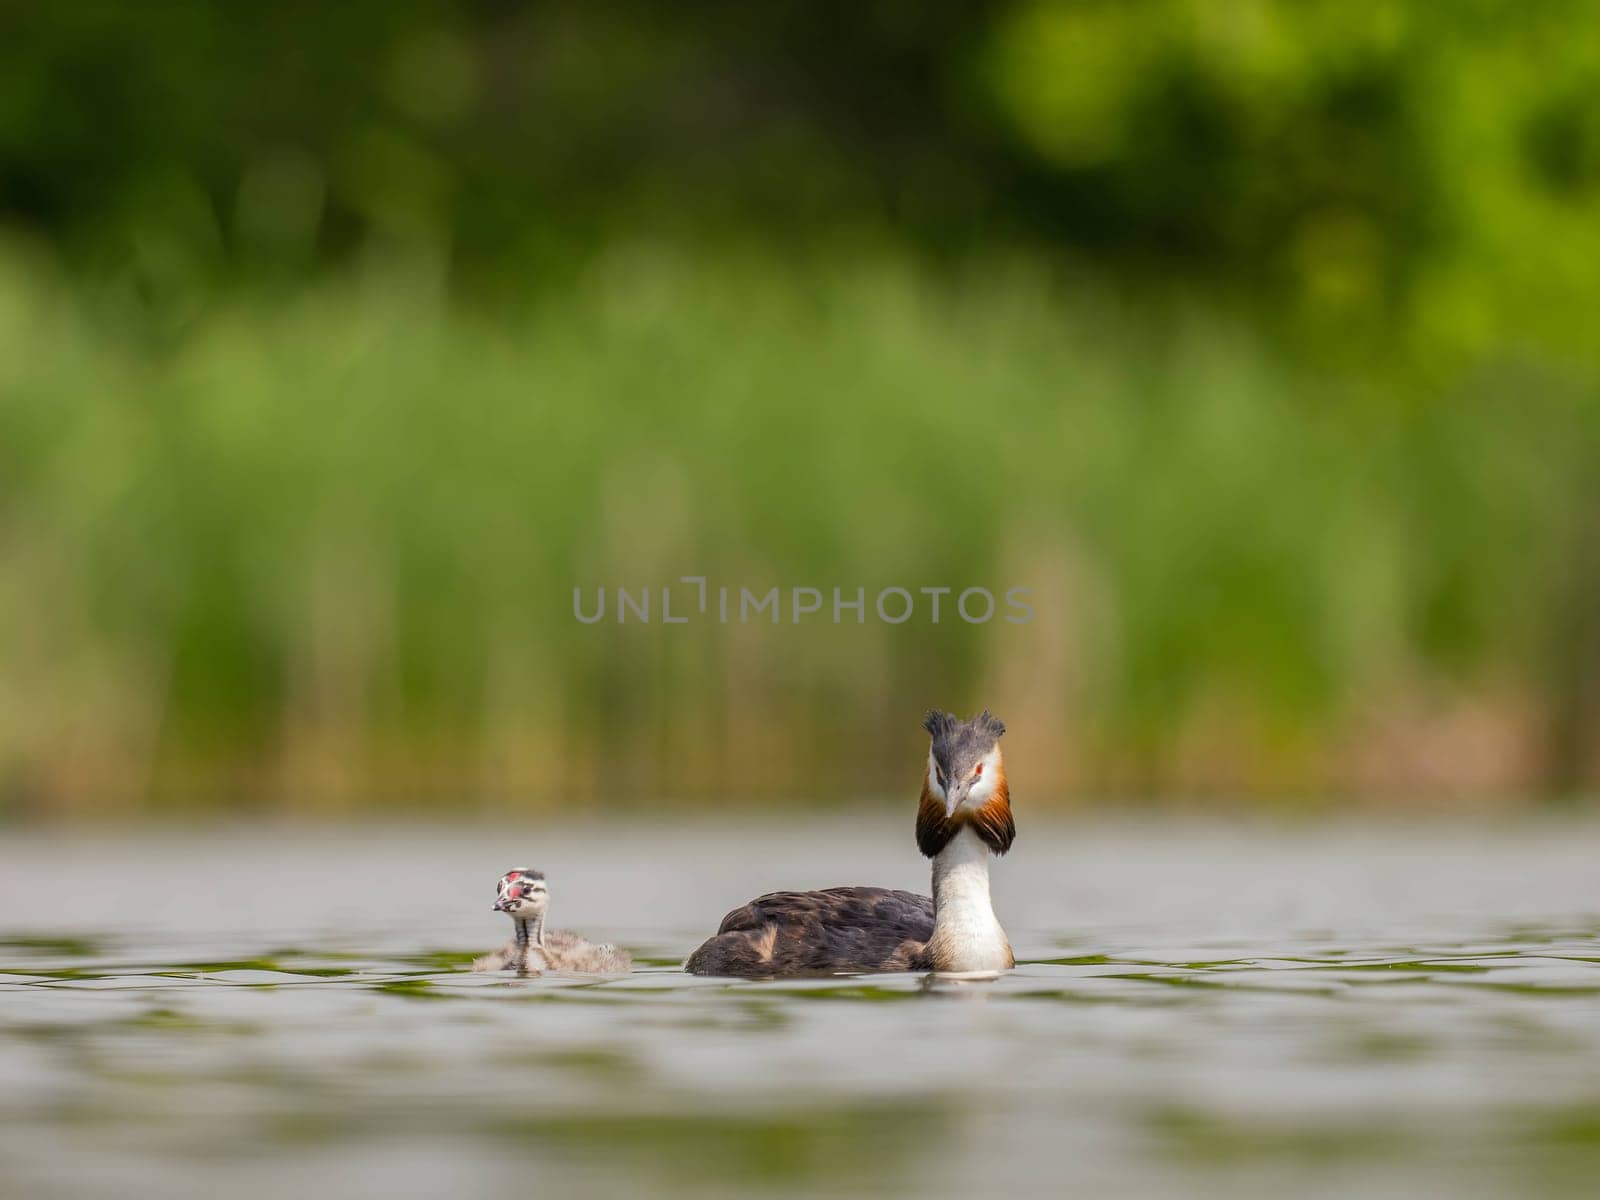 The Great Crested Grebe and its young one gracefully swim on the water's surface, surrounded by lush green scenery.